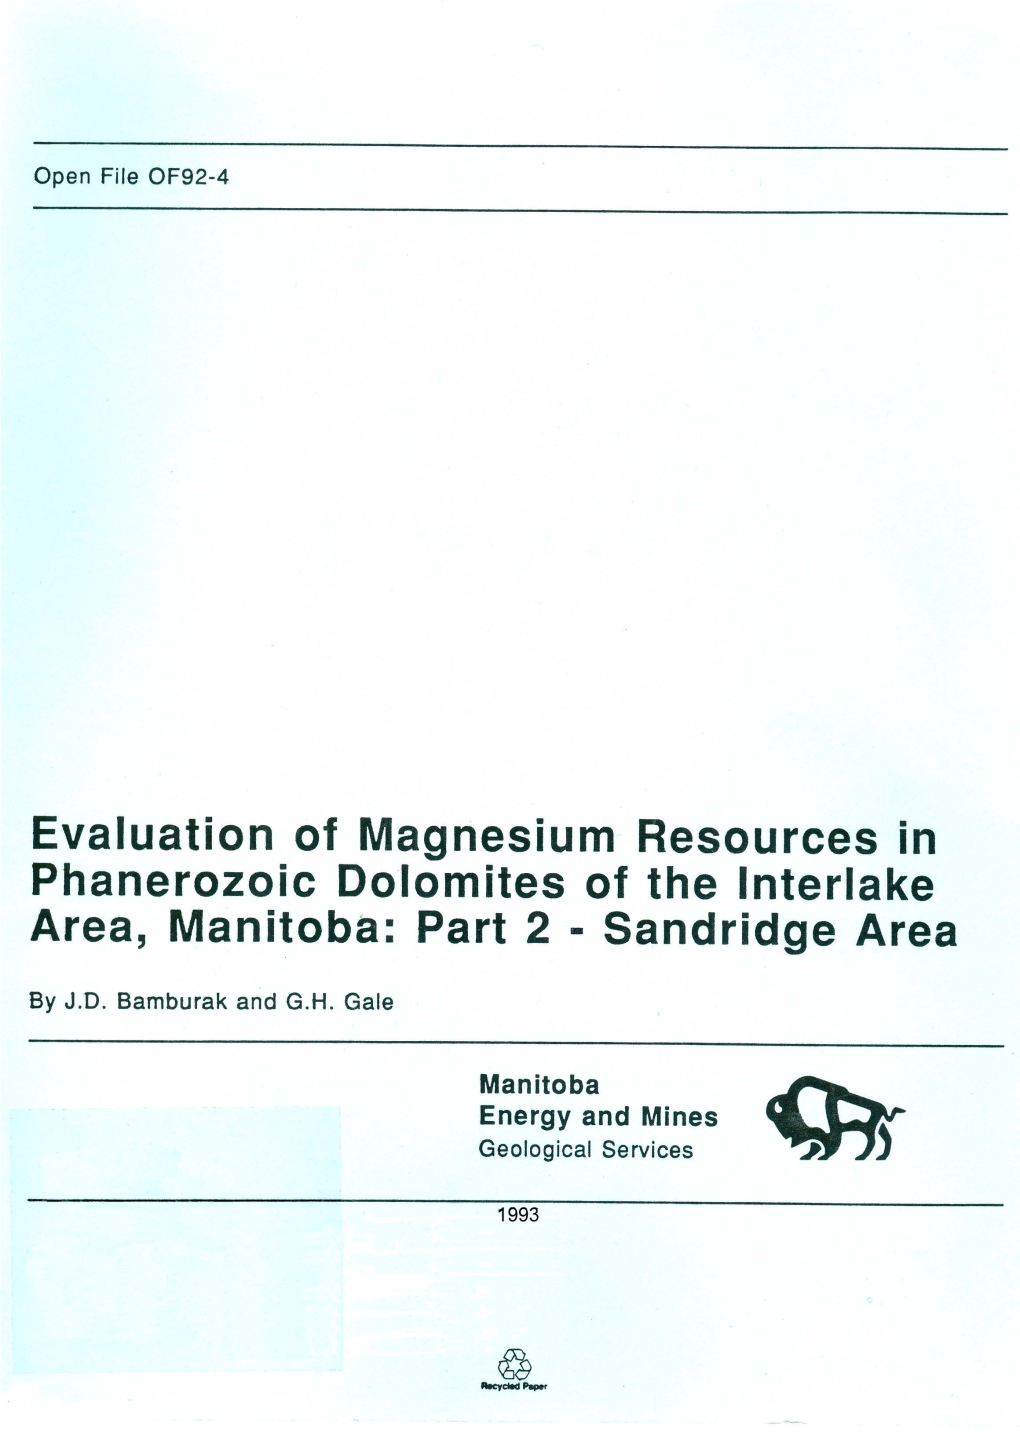 Open File Report OF92-4: Evaluation of Magnesium Resources In